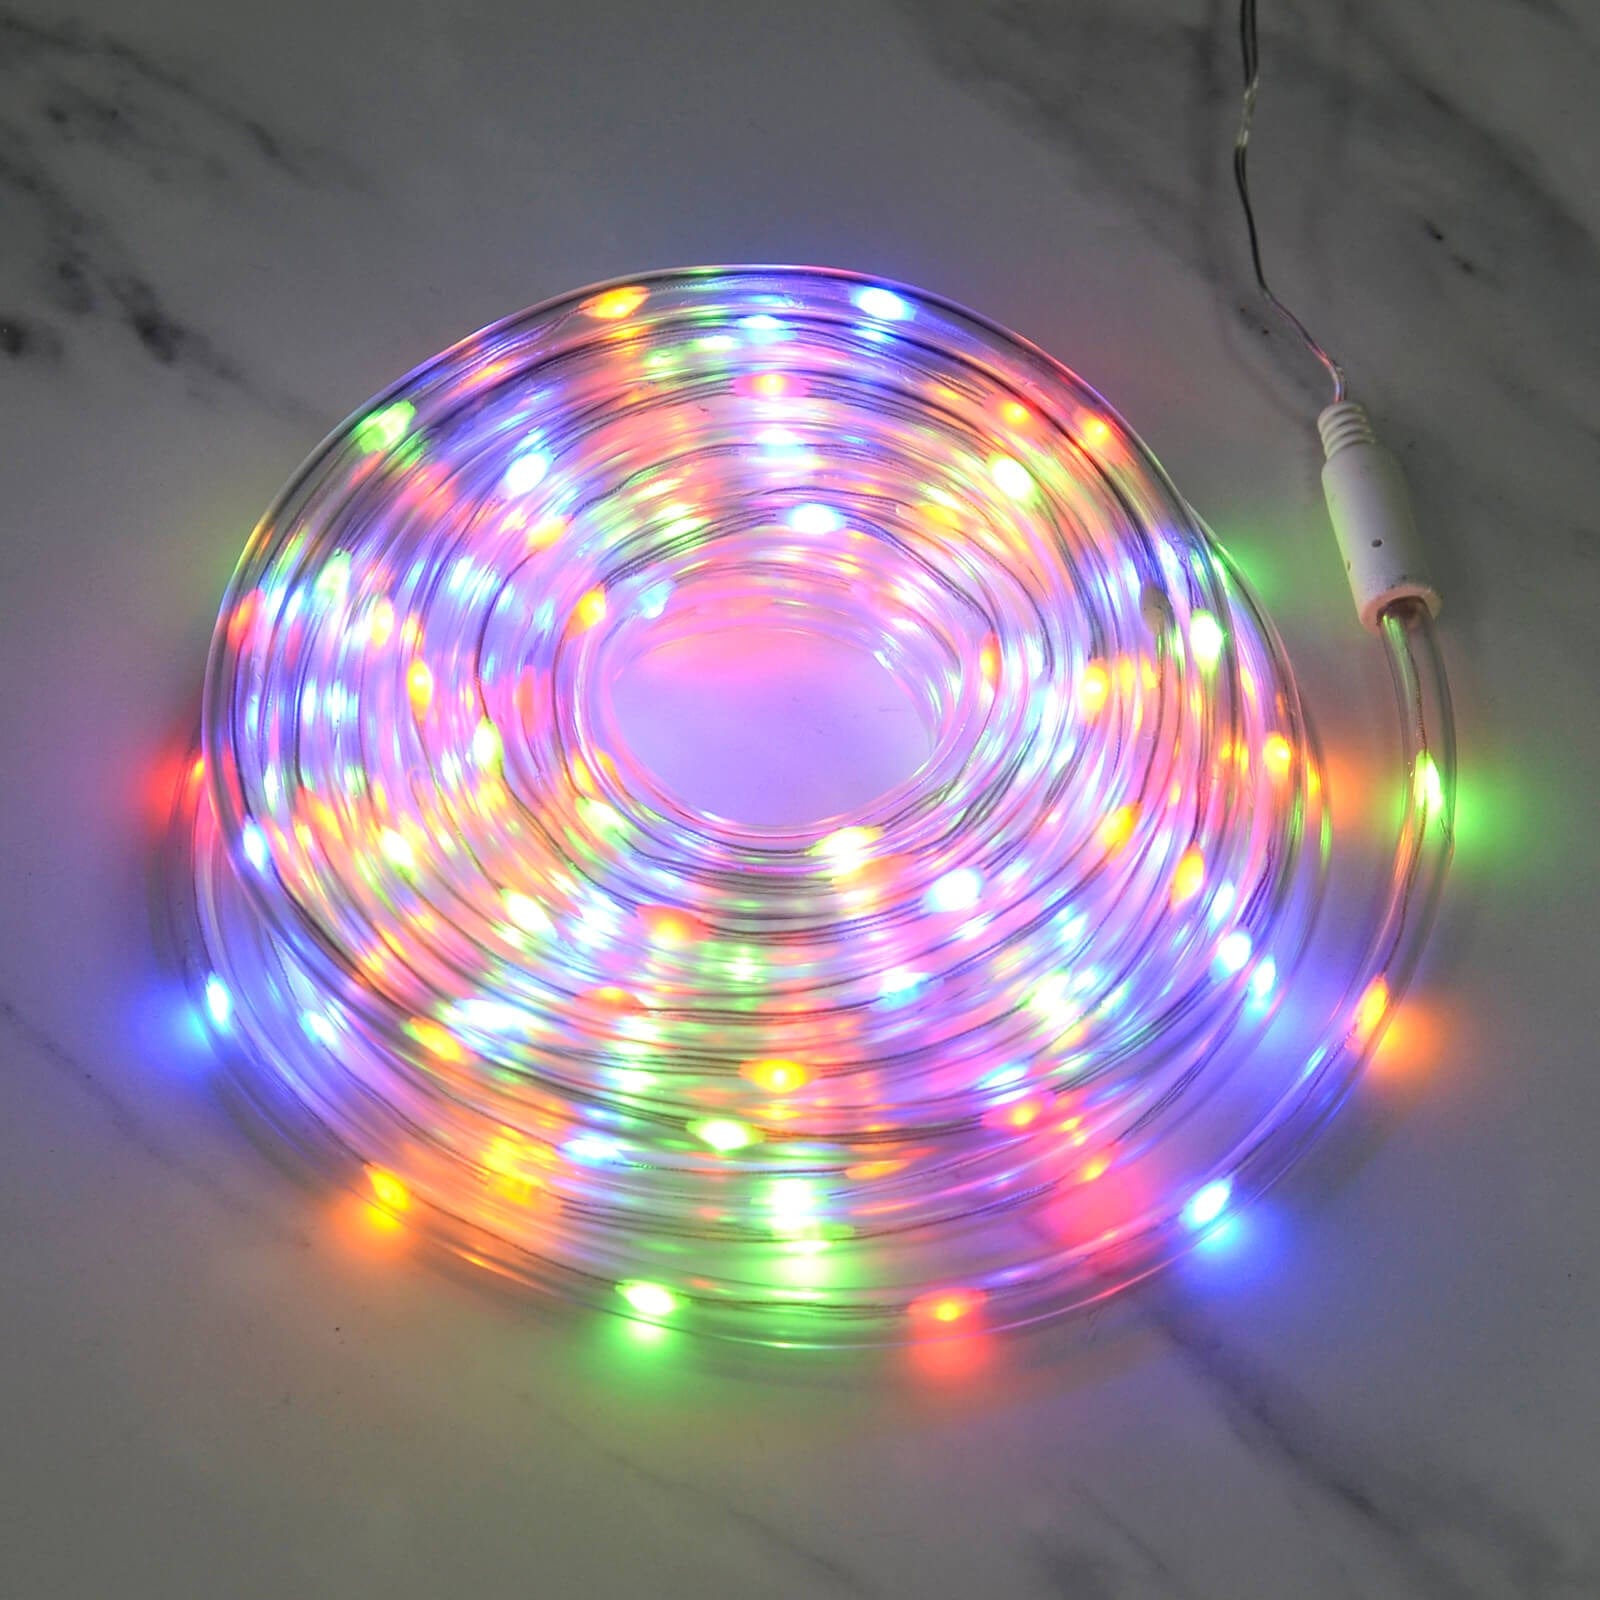 multicoloured rope light fro Christmas decoration lit up in a coil on a marble floor